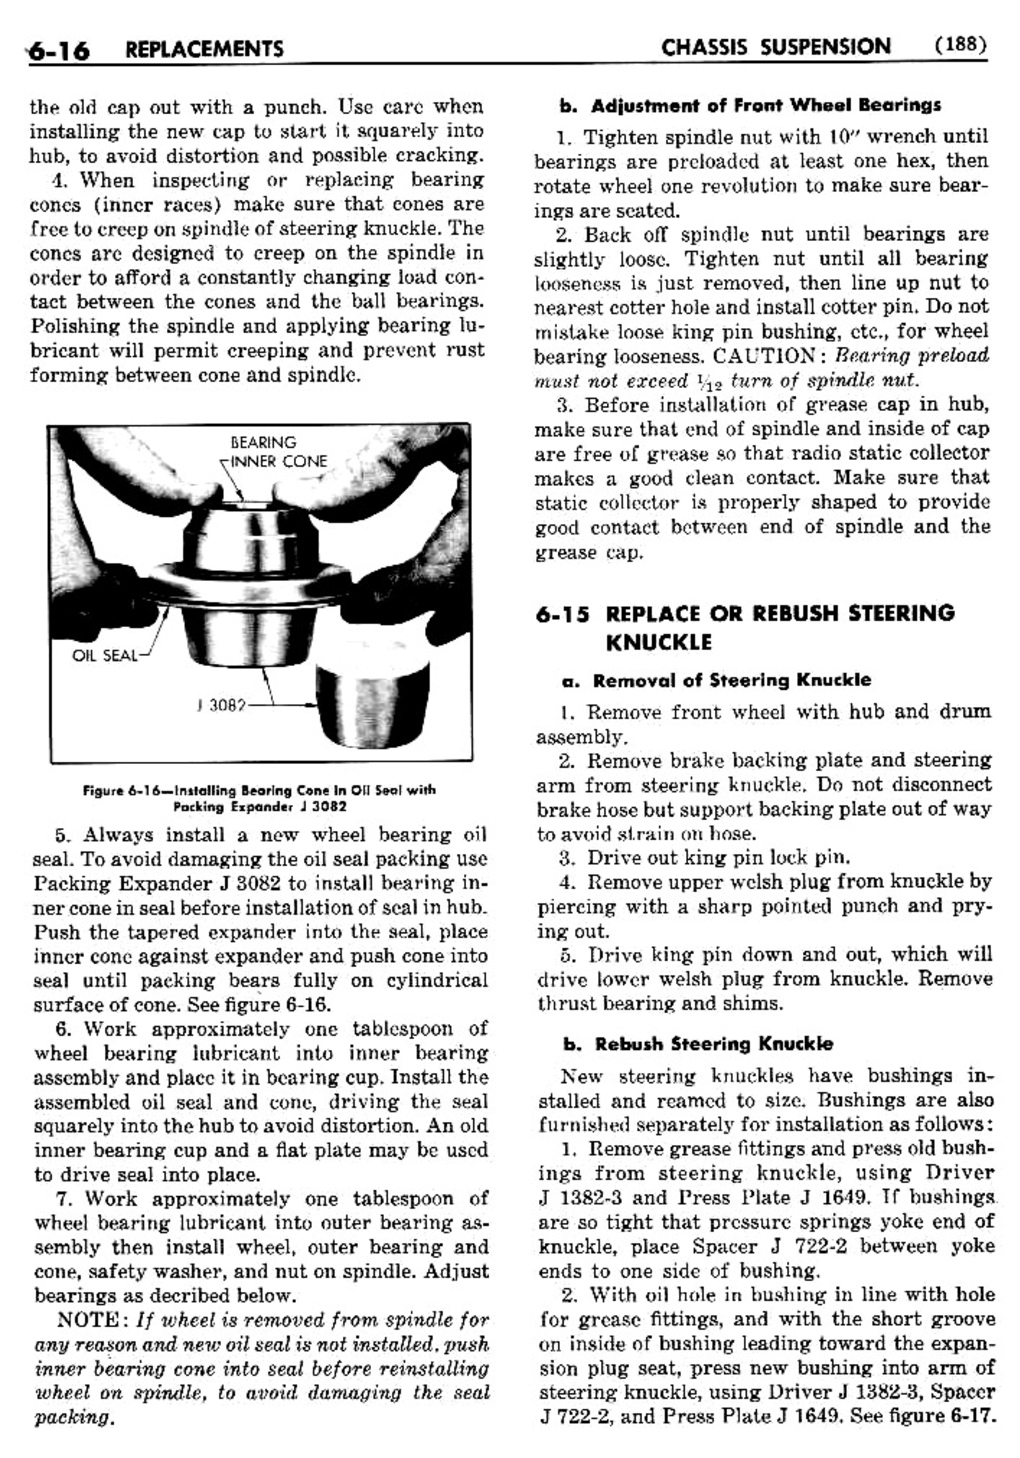 n_07 1950 Buick Shop Manual - Chassis Suspension-016-016.jpg